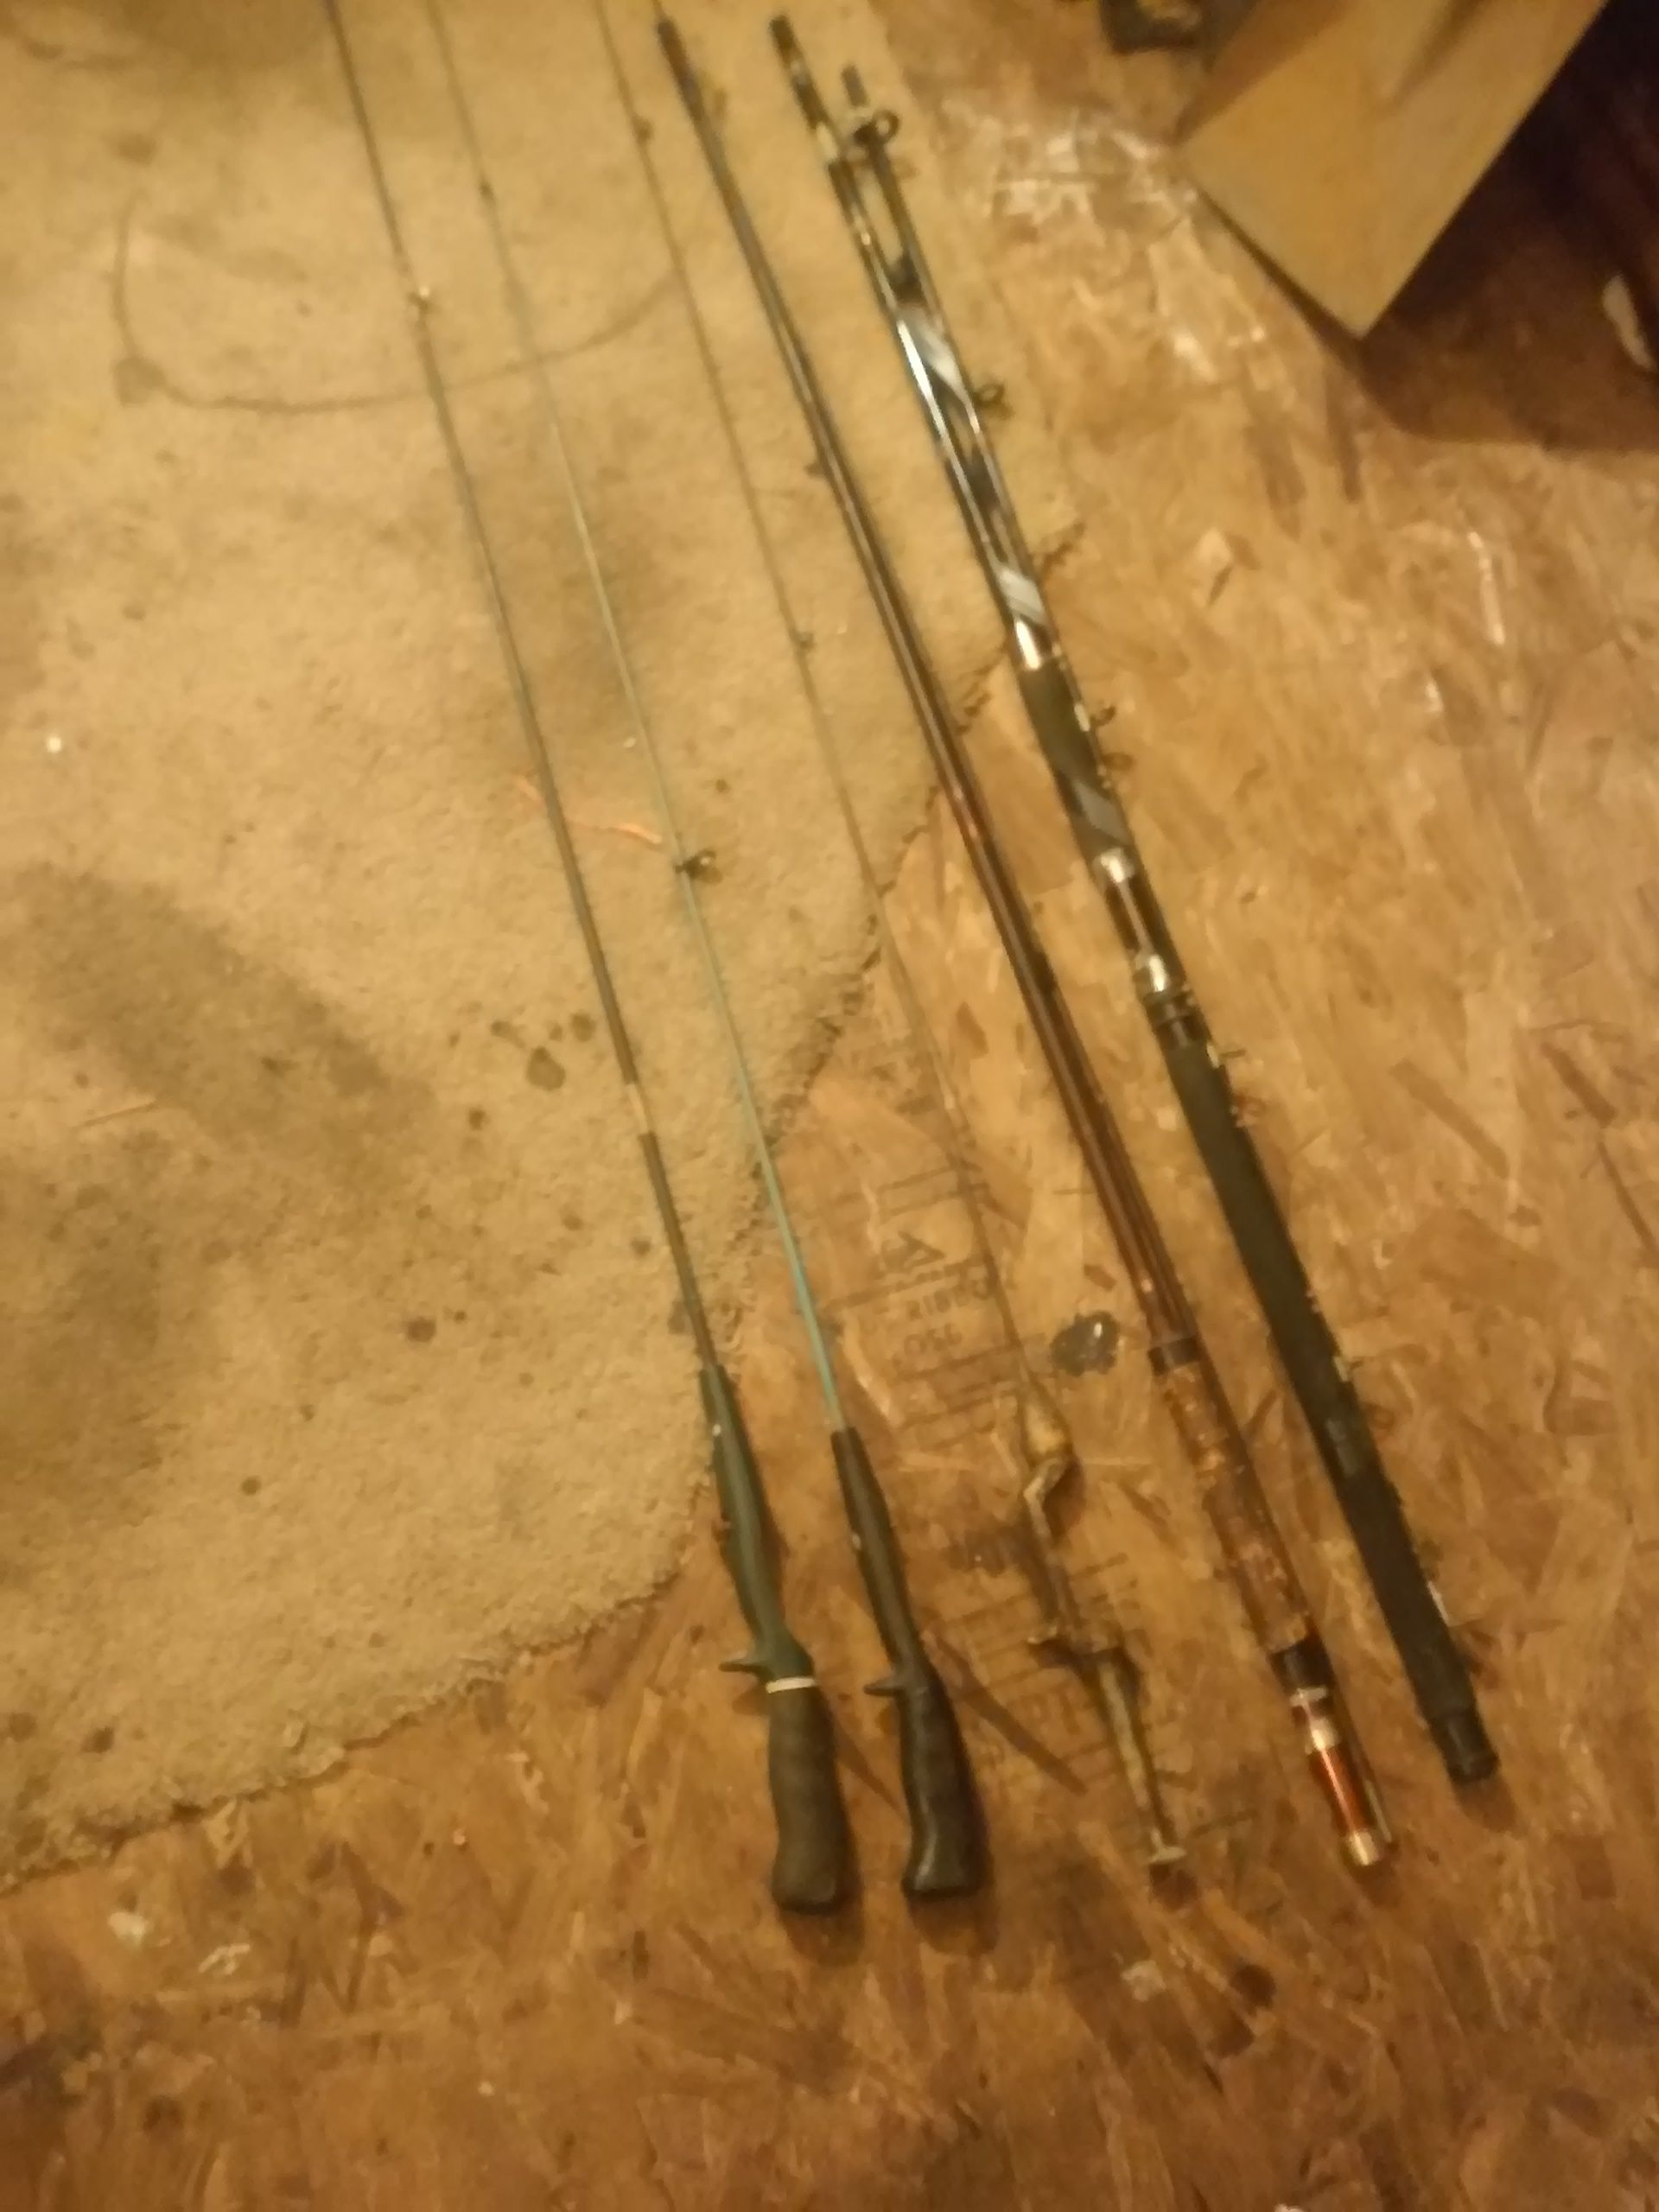 1 hardy bamboo Fly fishing rod 2 zebco 1 ocean city and tackle have a new river pole zebco and a new smaller zebco